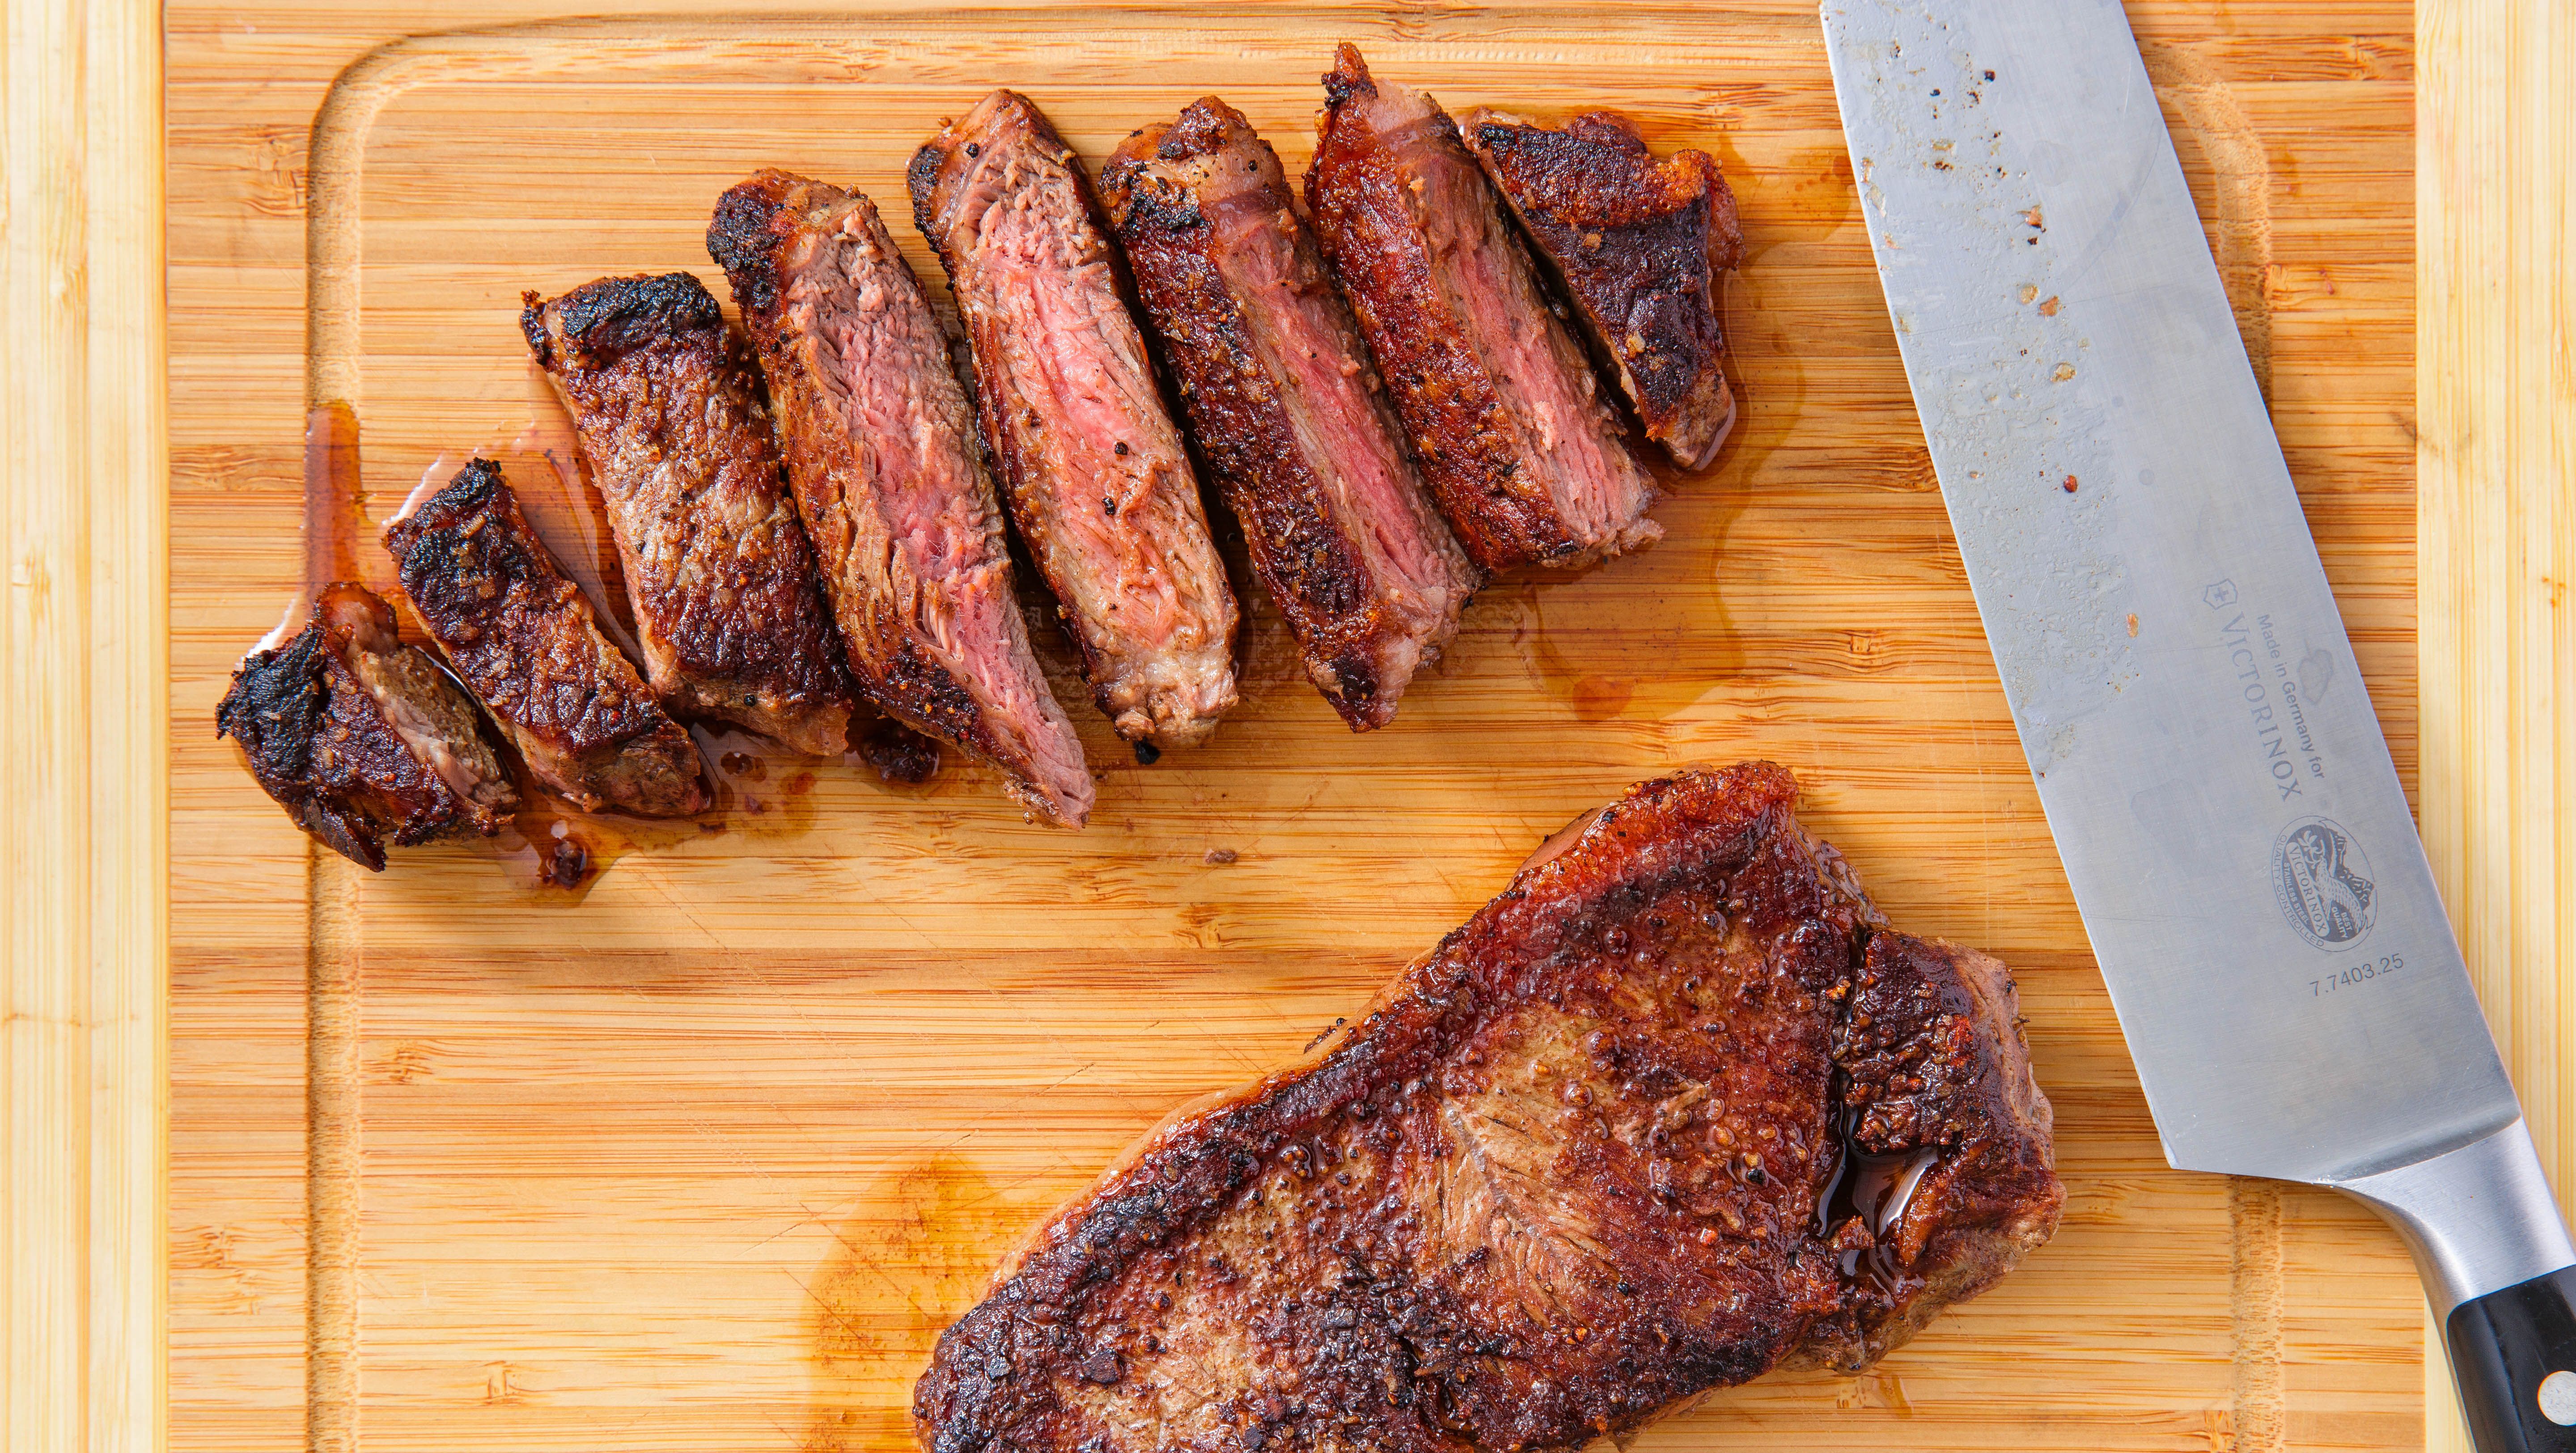 8 Simple Steps For Perfectly Pan Fried Beef Steak – The Sausage Man